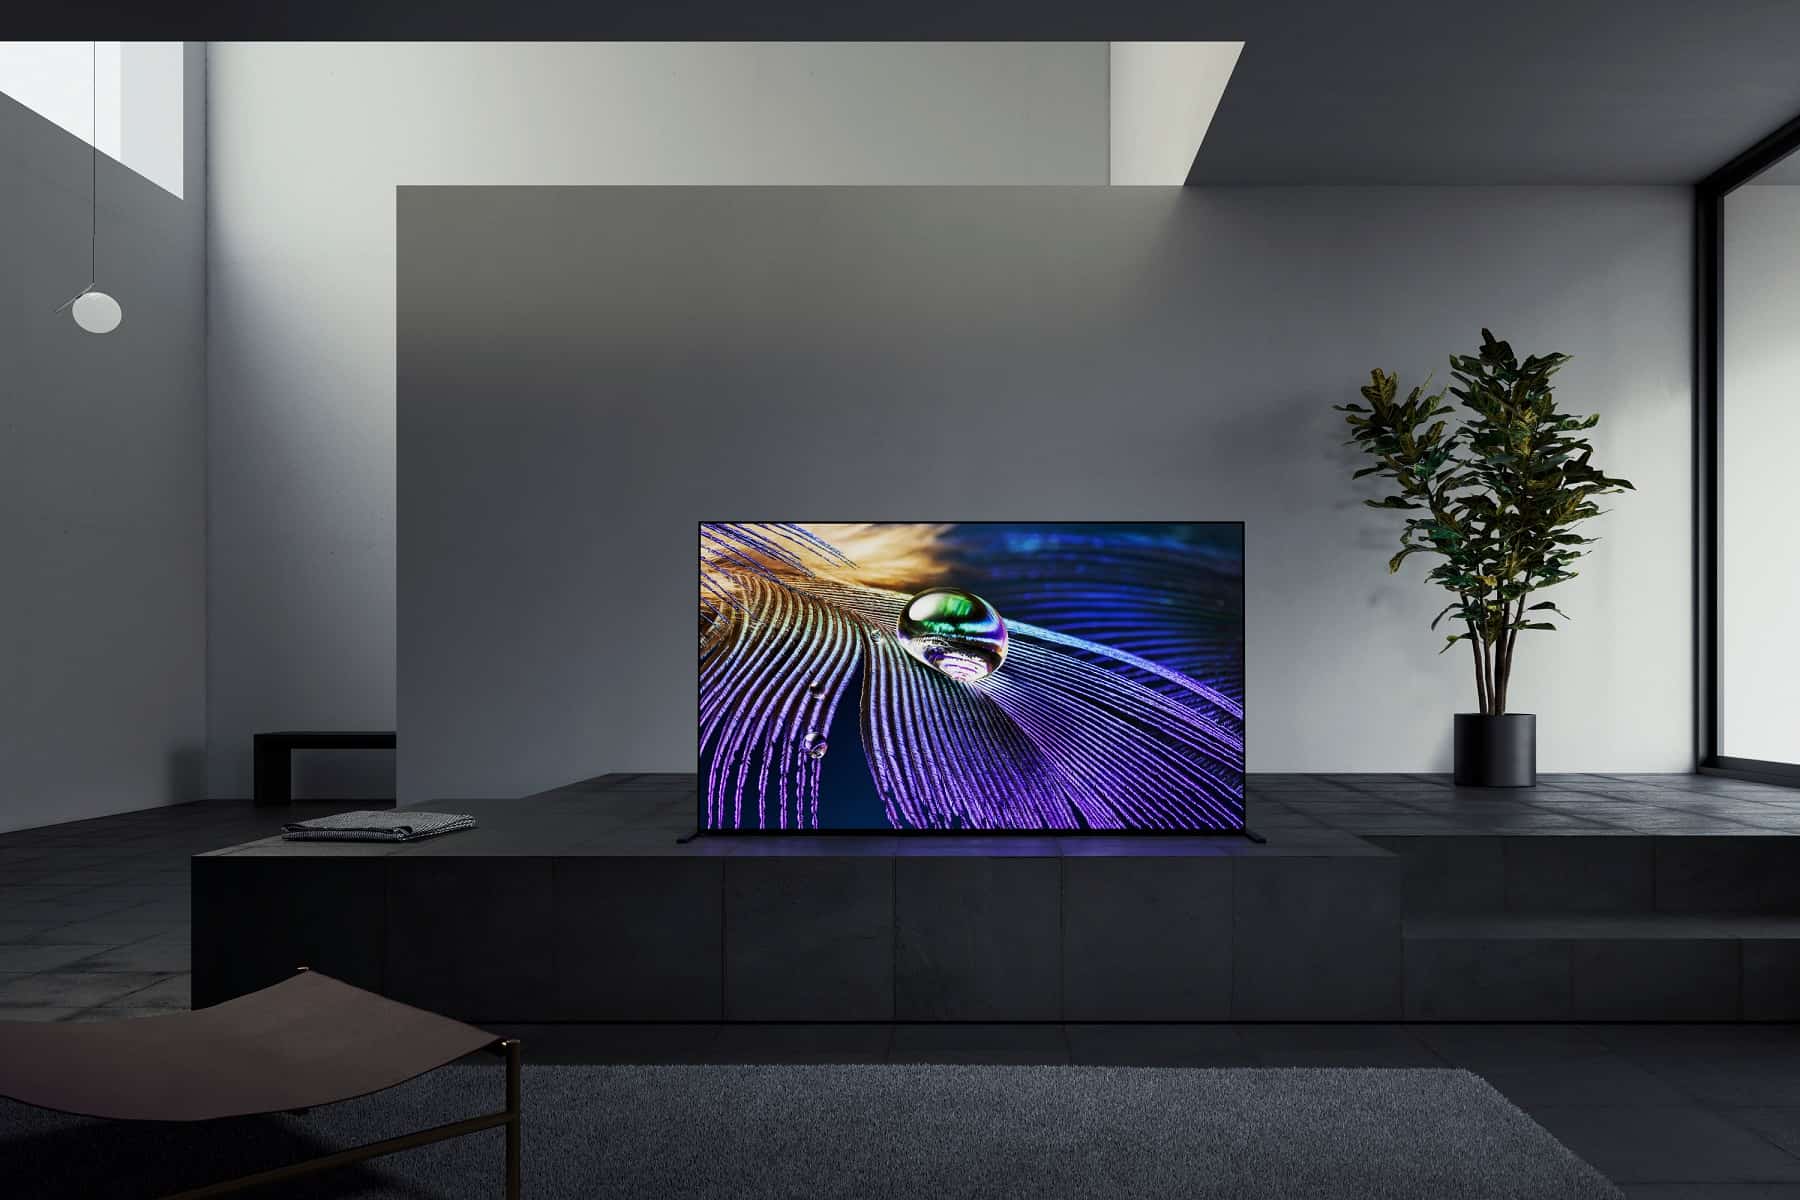 World’s first cognitive intelligence TV – Sony BRAVIA XR TVs are now available in the UAE